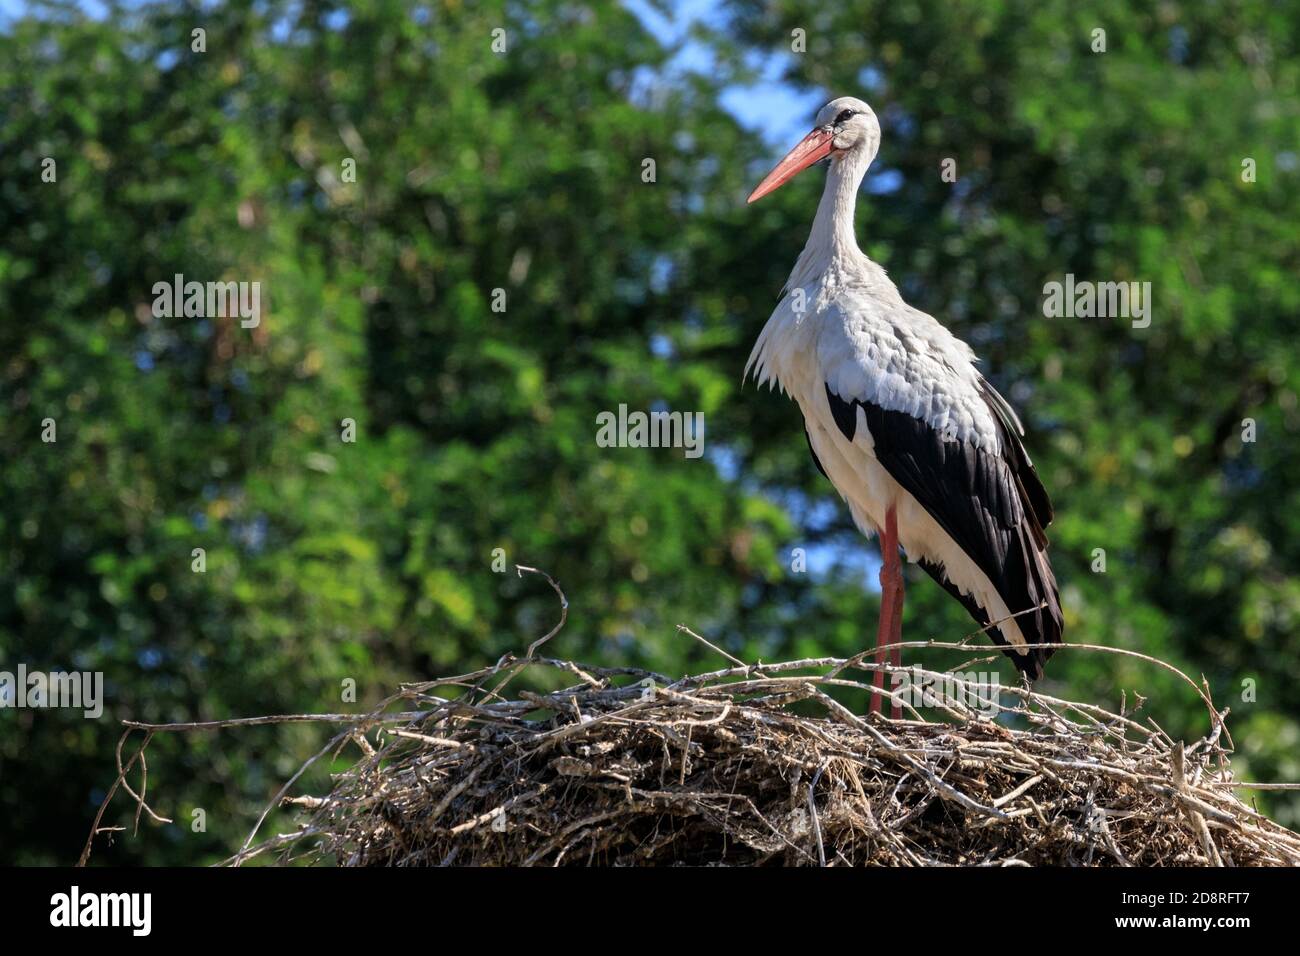 White stork (Ciconia ciconia) guarding a nest, Muensterland, Germany Stock Photo